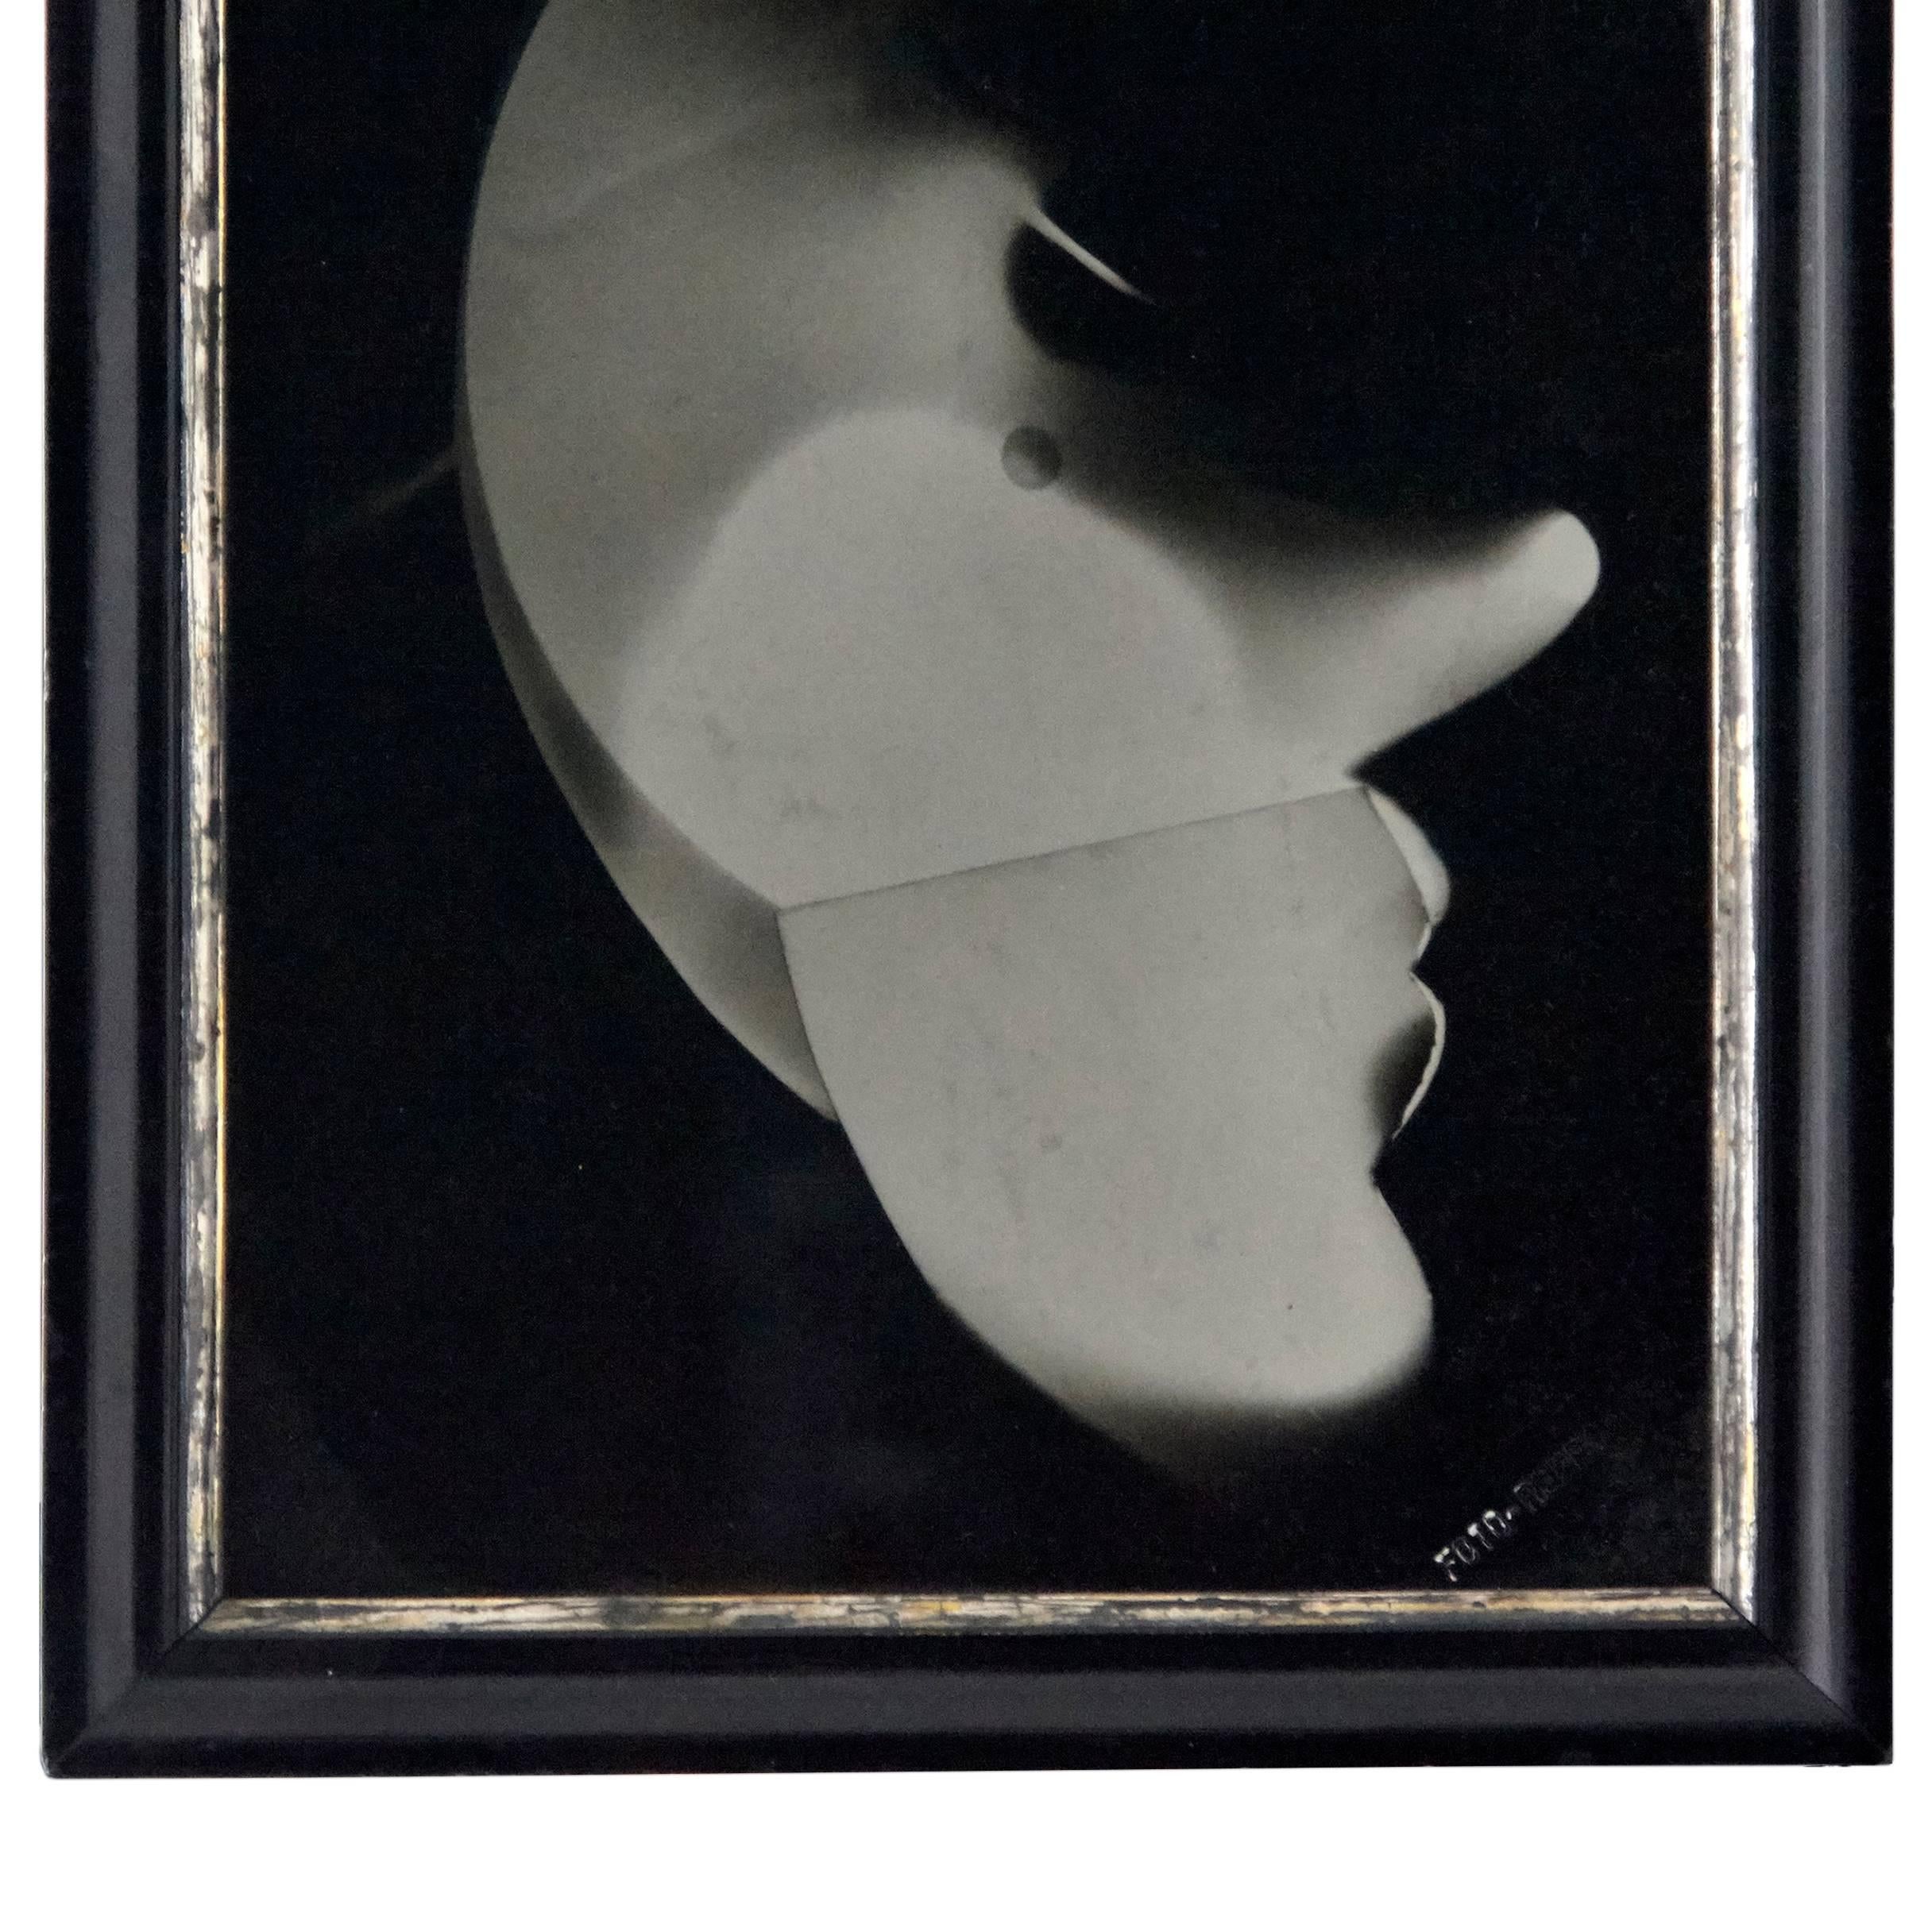 Self portrait by László Moholy-Nagy, 1922.

A posthumous print from the original negative.
Embossed in the right low corner Foto-Repro, 1972.

Excellent print and framed in a 20th century frame. Gelatin silver bromide.

László Moholy-Nagy